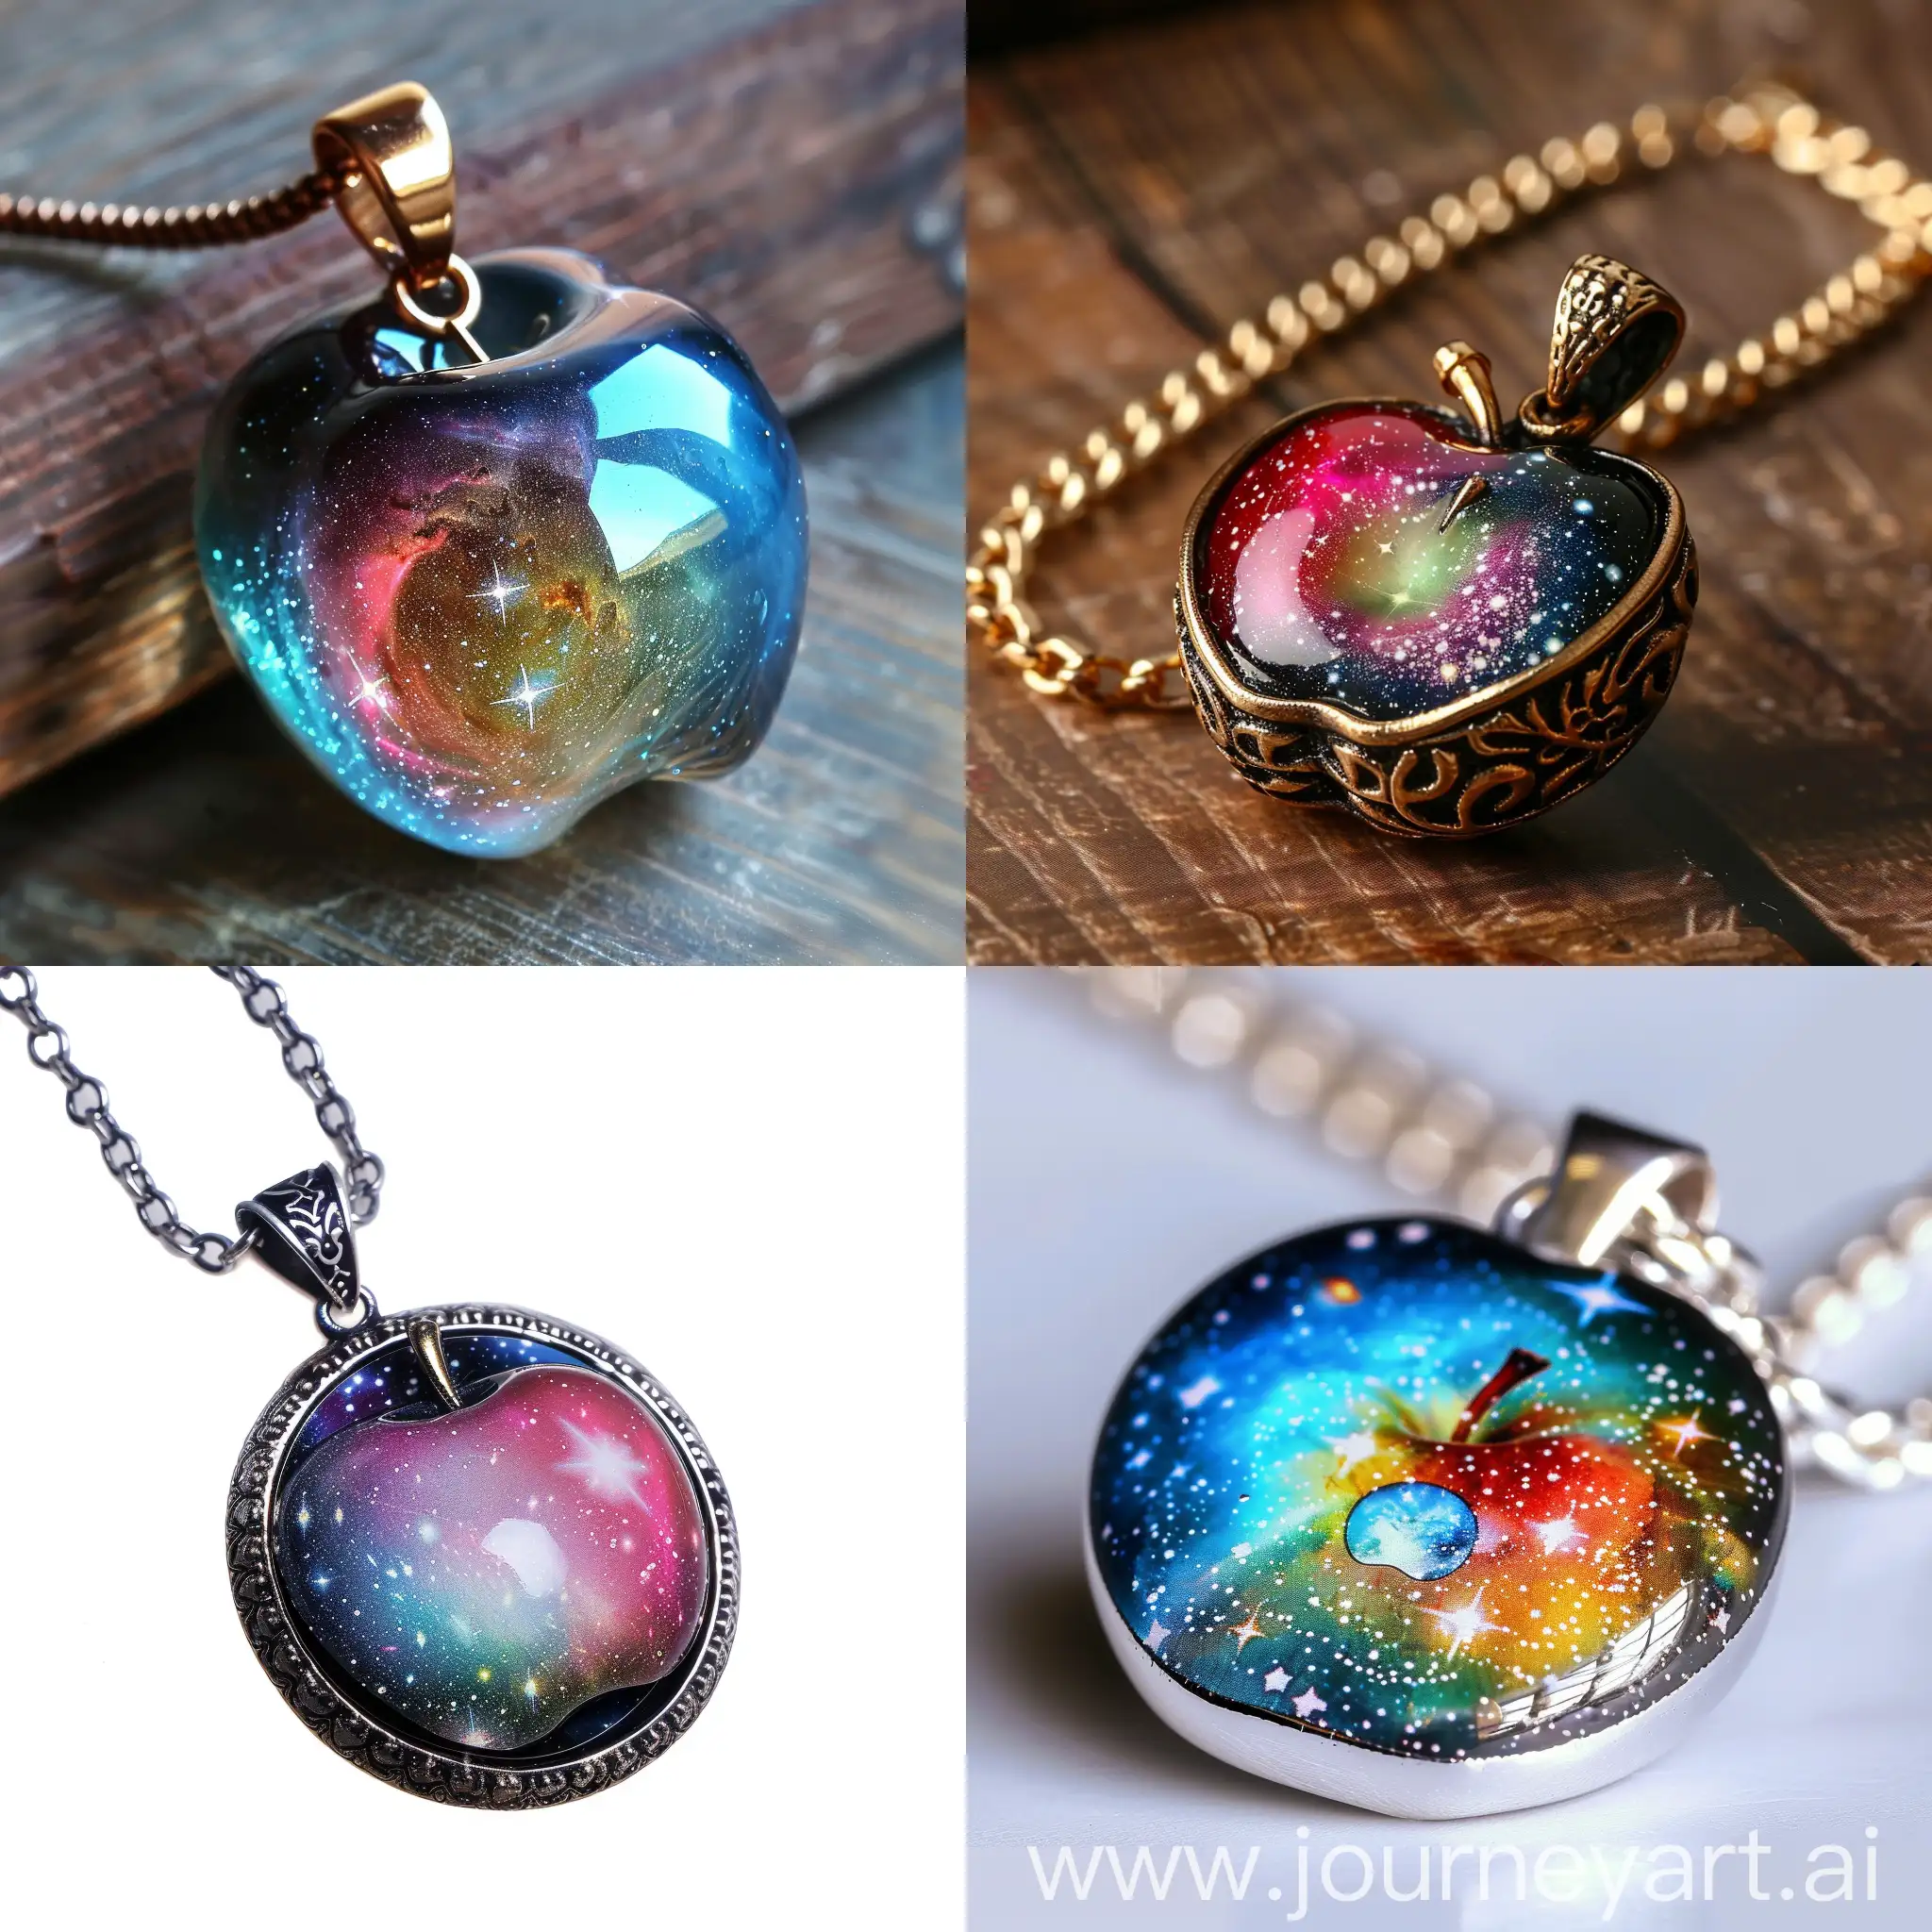 Vibrant-Galaxy-Apple-Pendant-Jewelry-with-Intricate-Detailing